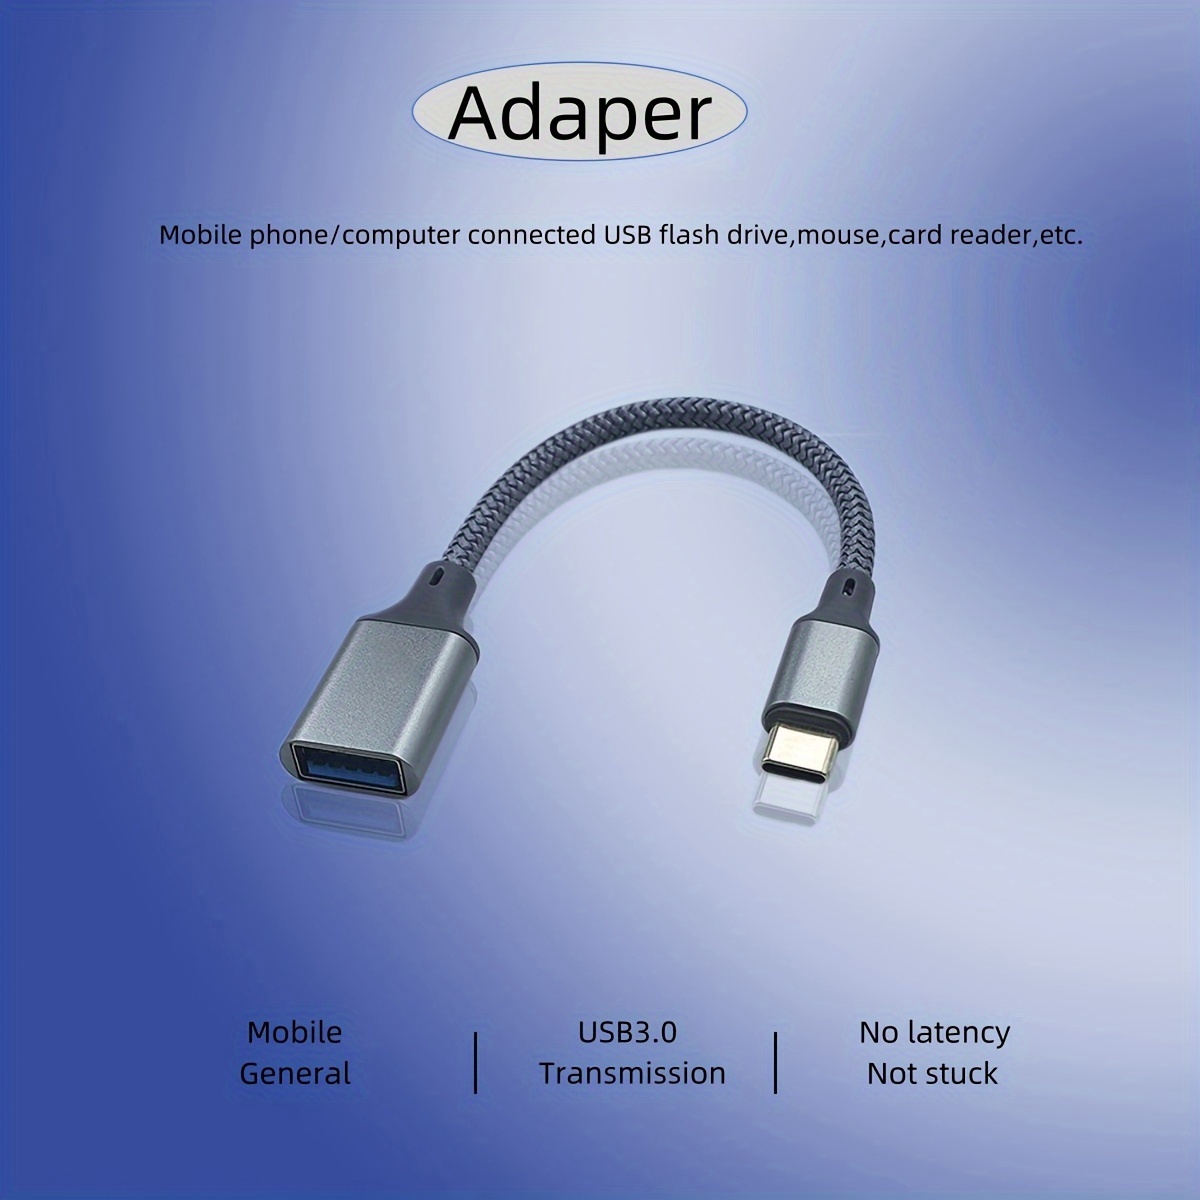 USB C to USB 3.0 A Female (2 Pack) OTG Adapter Compatible with PC  Tablet/Thumb drives for FULL USB Braided Thunderbolt 3 On The Go Cable